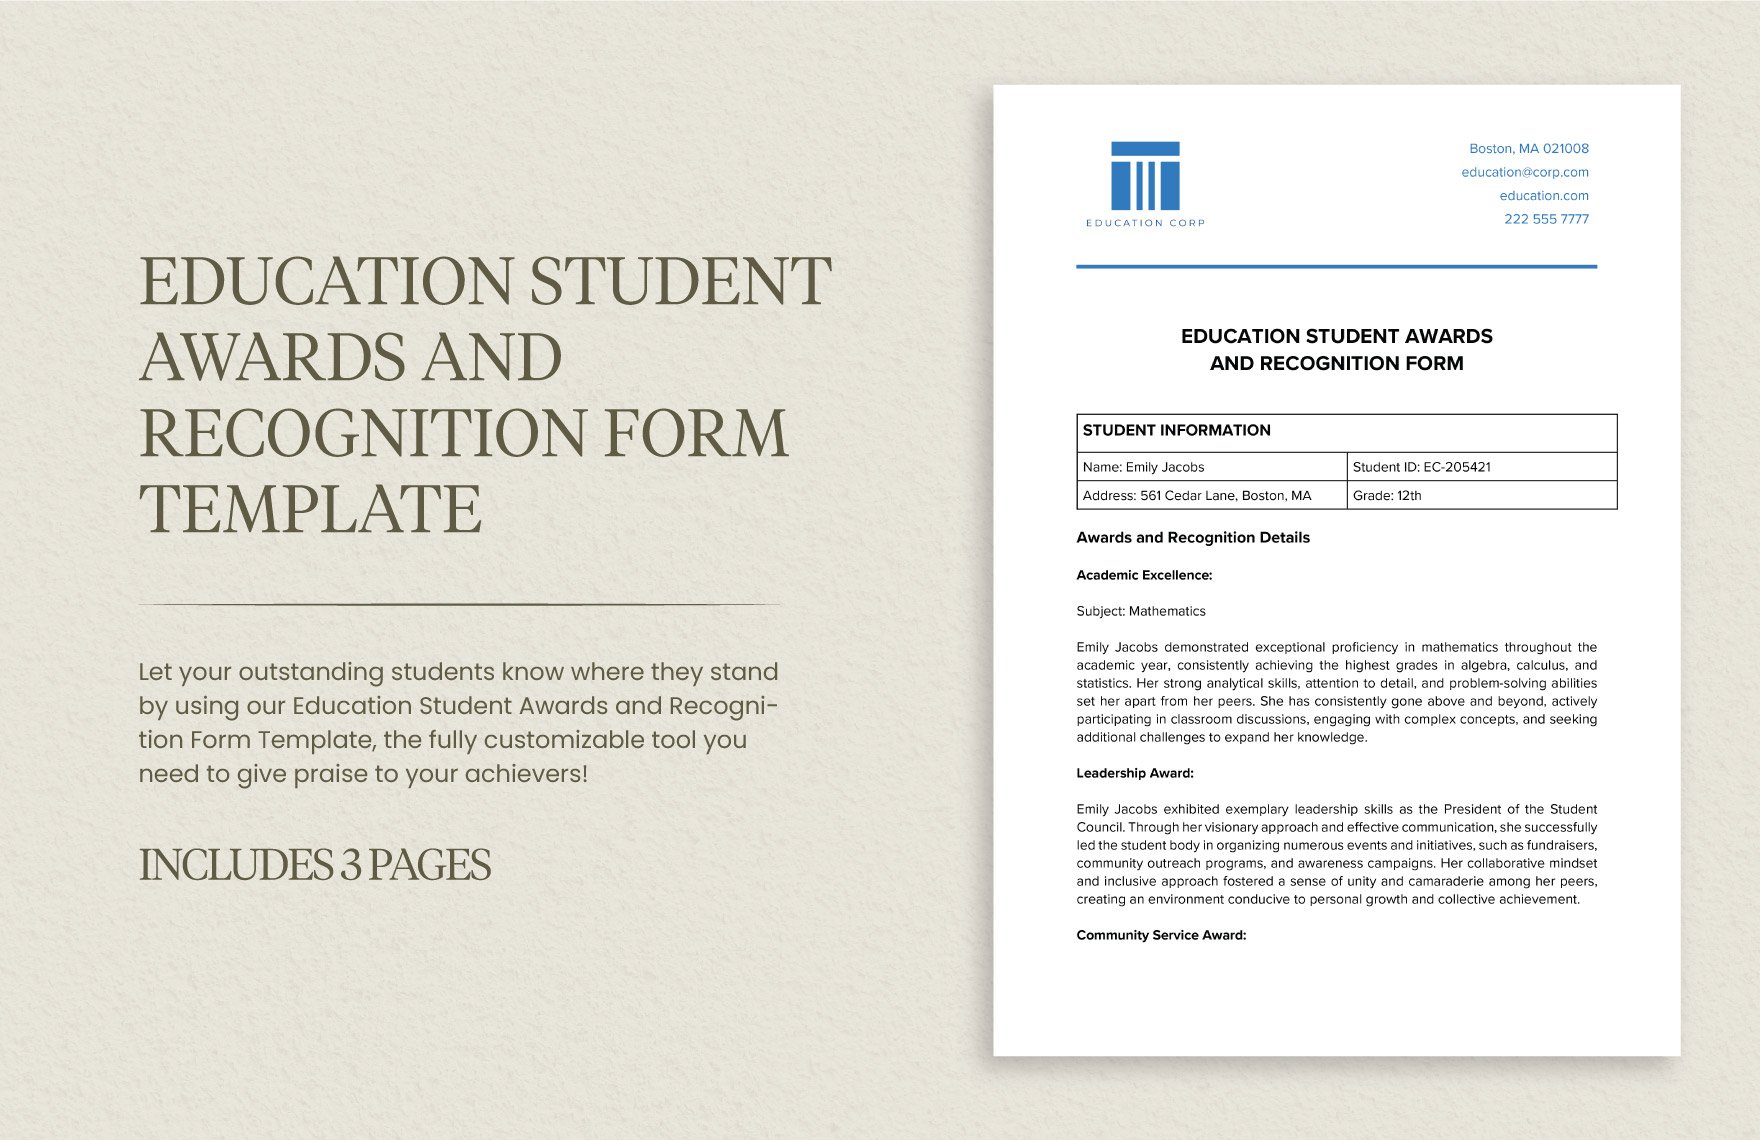 Education Student Awards and Recognition Form Template in Word, Google Docs, PDF